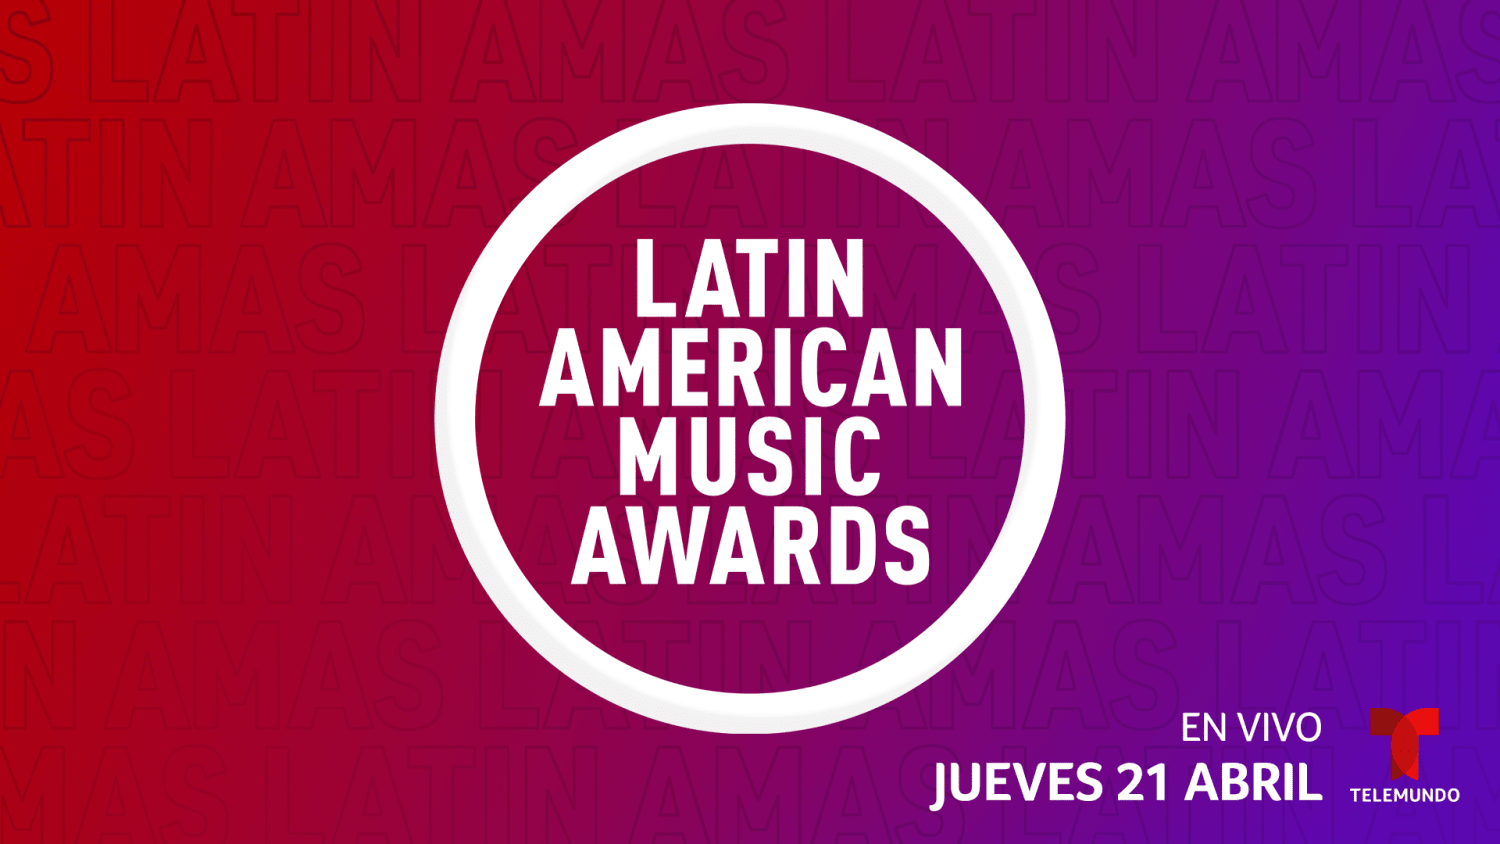 Latin American Music Awards 2022: Date, Time and Location